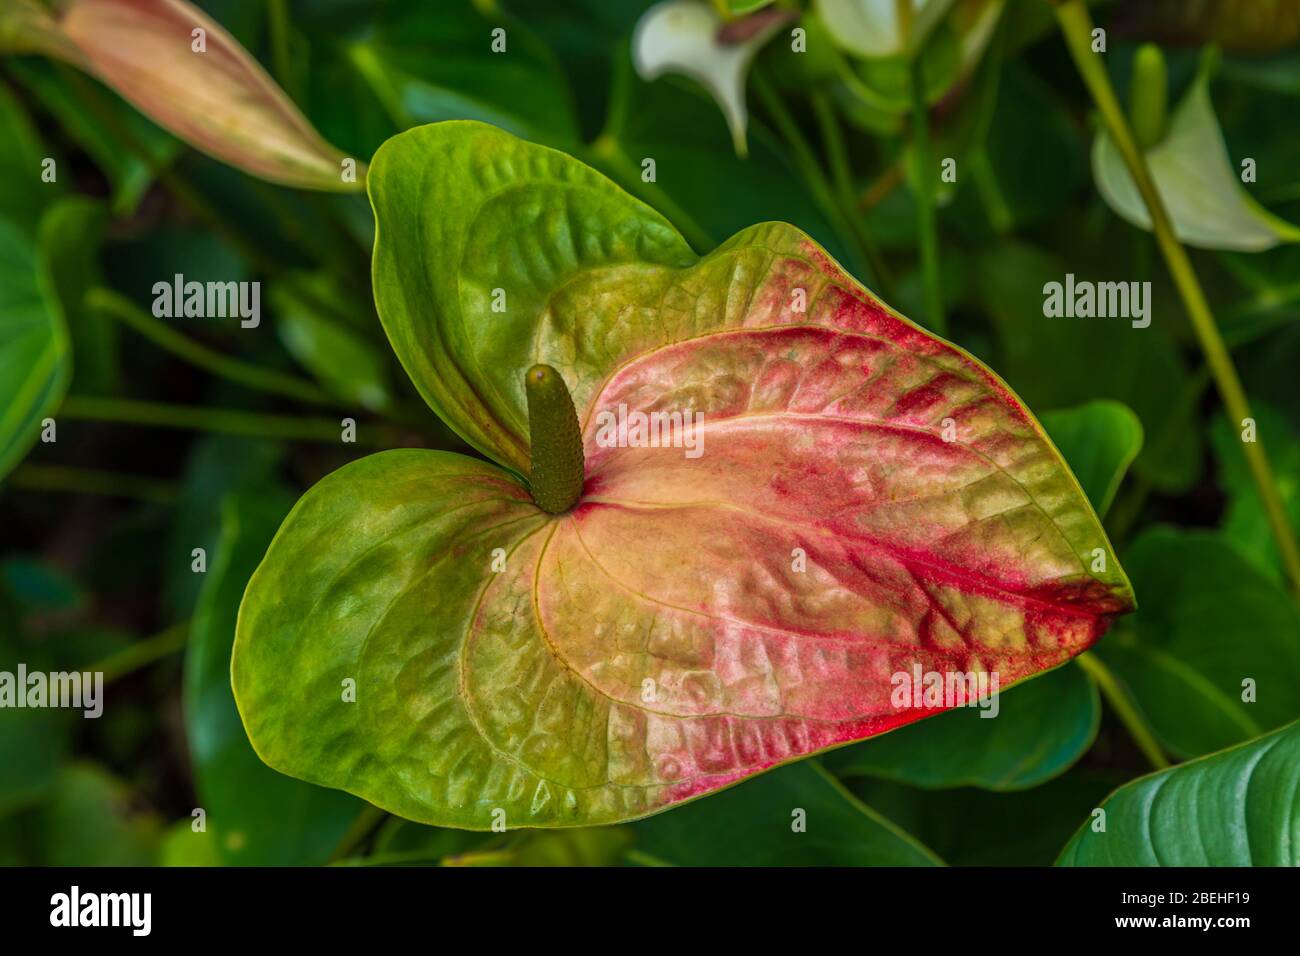 Anthurium, the largest genus of the arum family, Araceae. General common names include anthurium, tailflower, flamingo flower, and laceleaf. Stock Photo